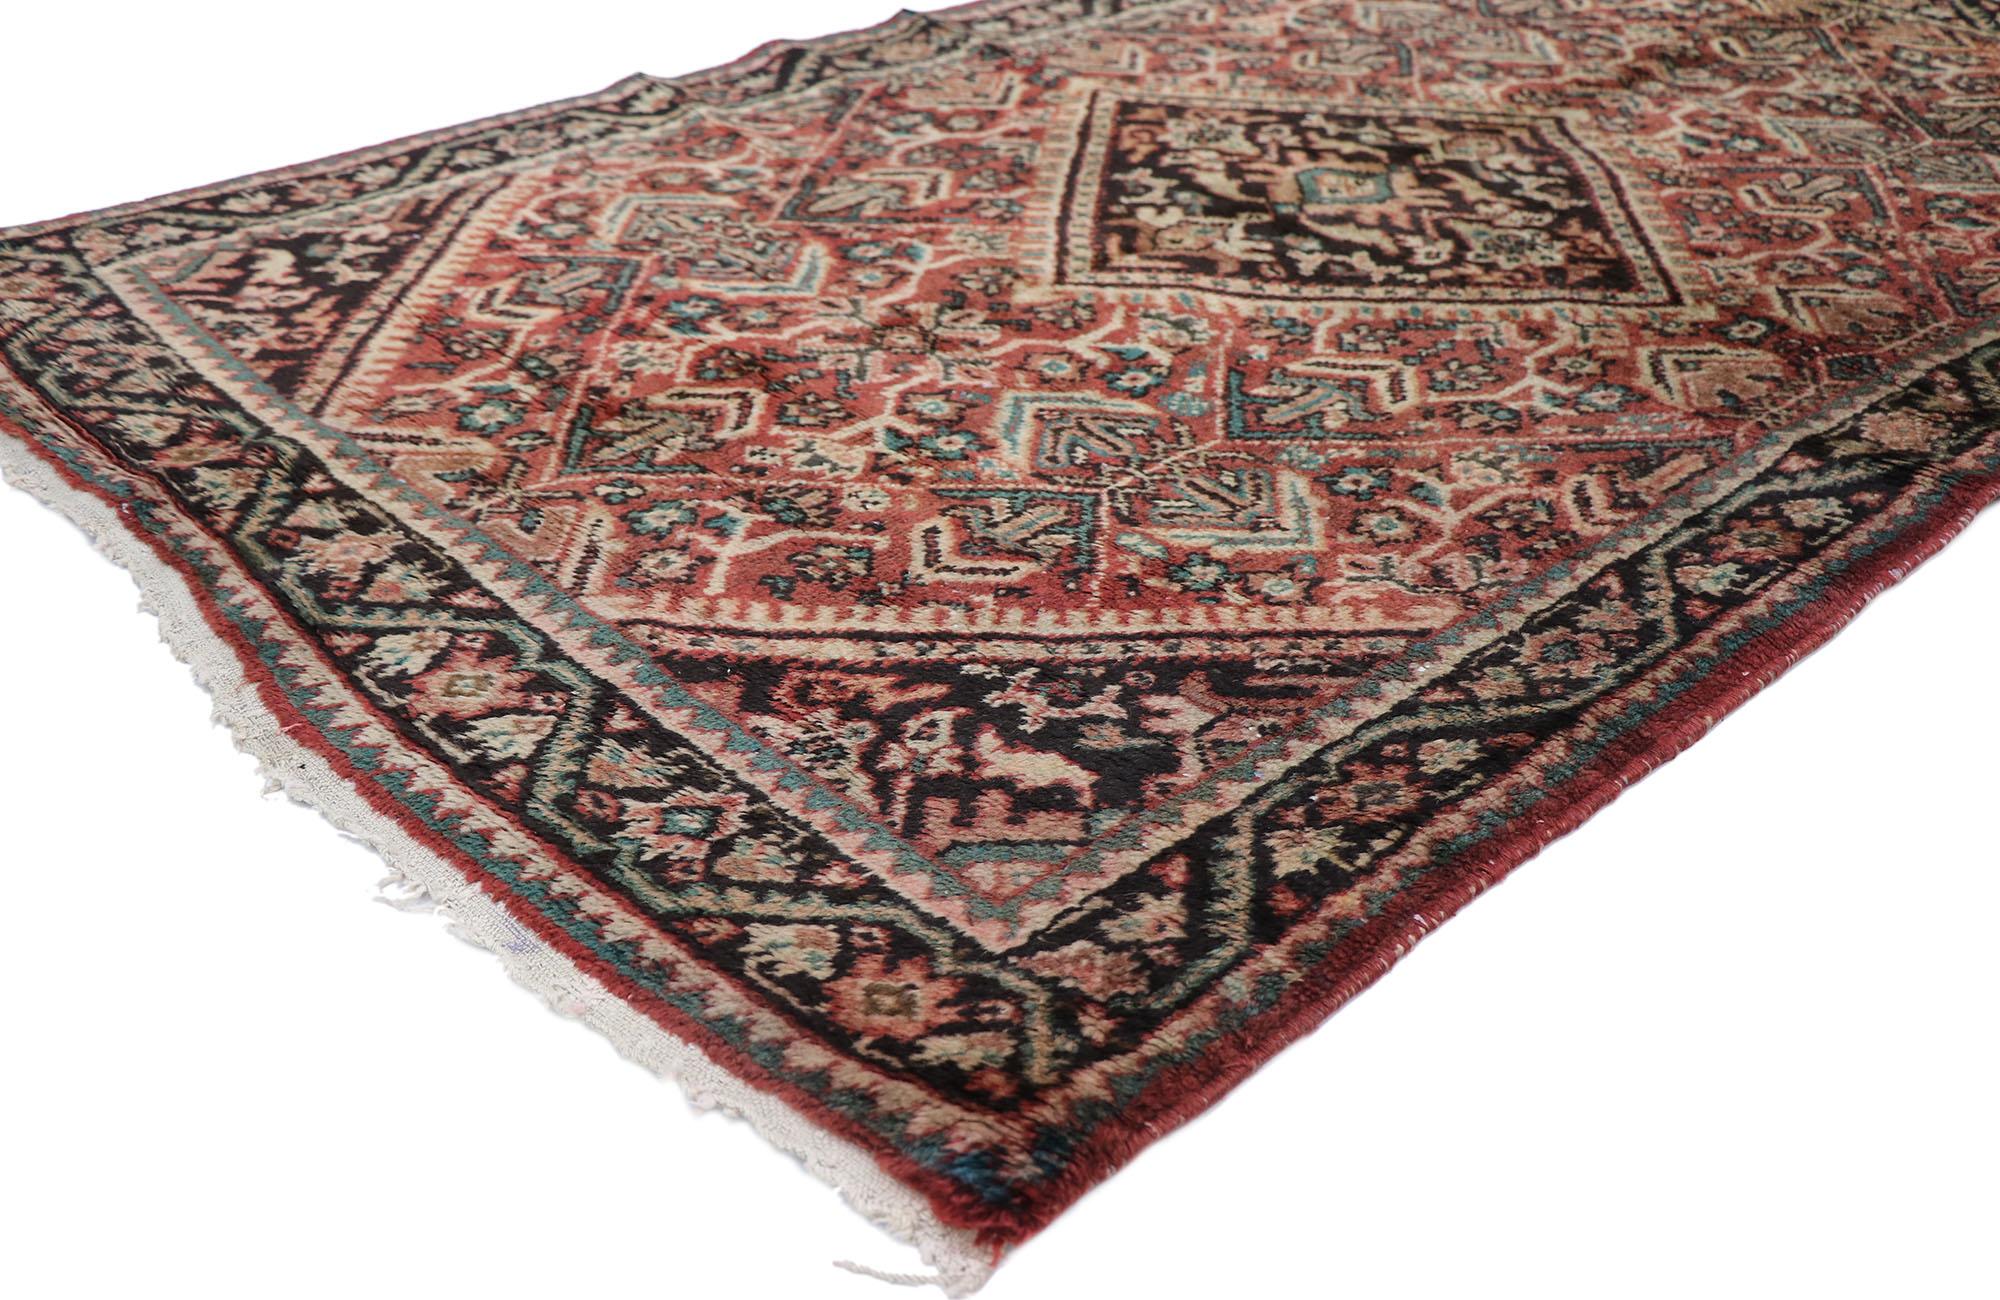 77688 Vintage Persian Mahal rug with Rustic Modern Style 04'00 x 06'04. Effortless beauty and rustic sensibility, this hand-knotted wool vintage Persian Persian Mahal rug gives a lively and light hearted feel with its bucolic charm. The abrashed